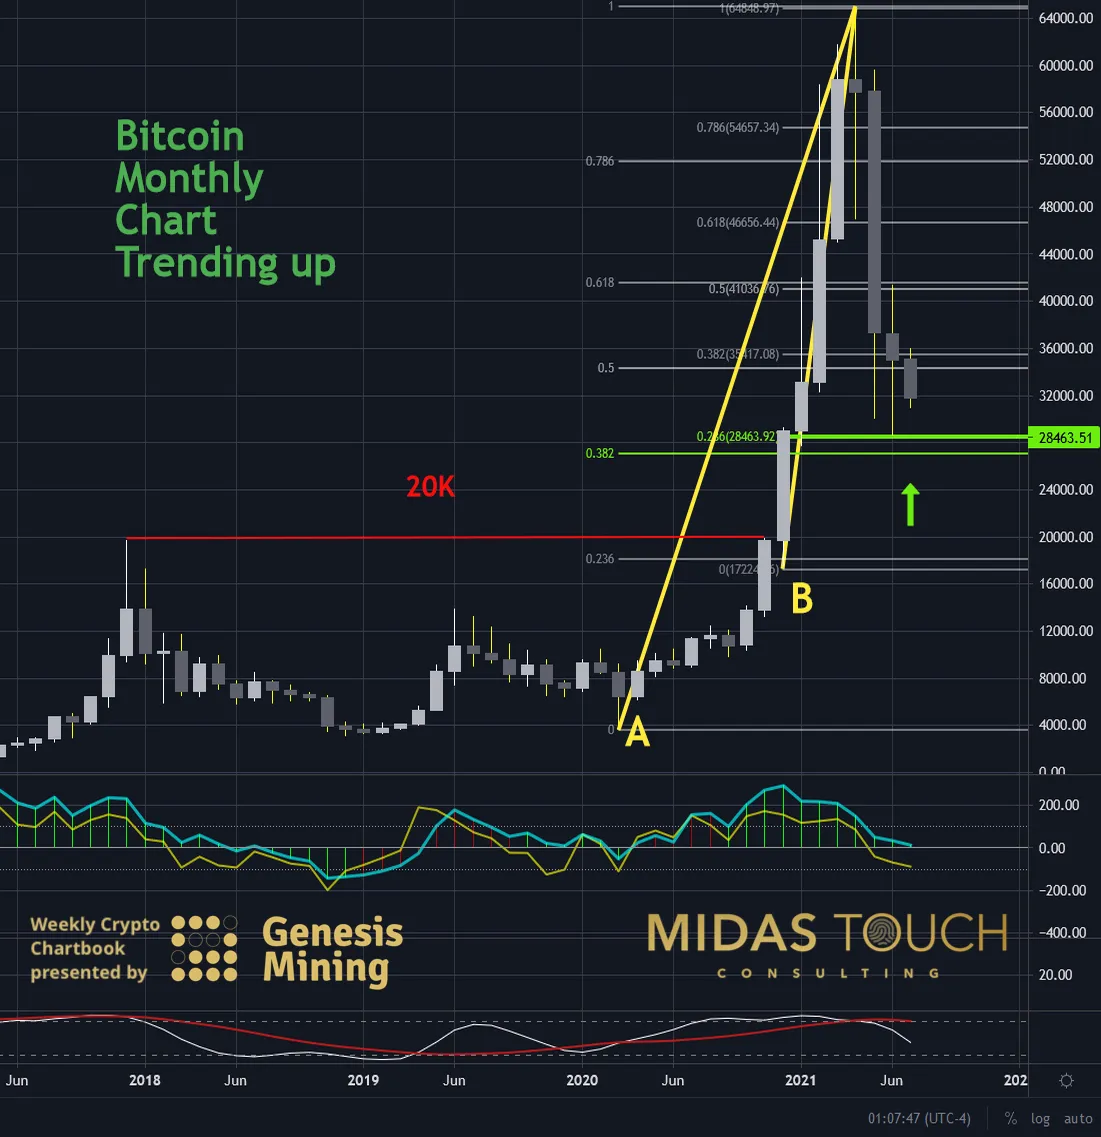 Chart-1-Bitcoin-in-US-Dollar-monthly-chart-as-of-July-20th-2021.png